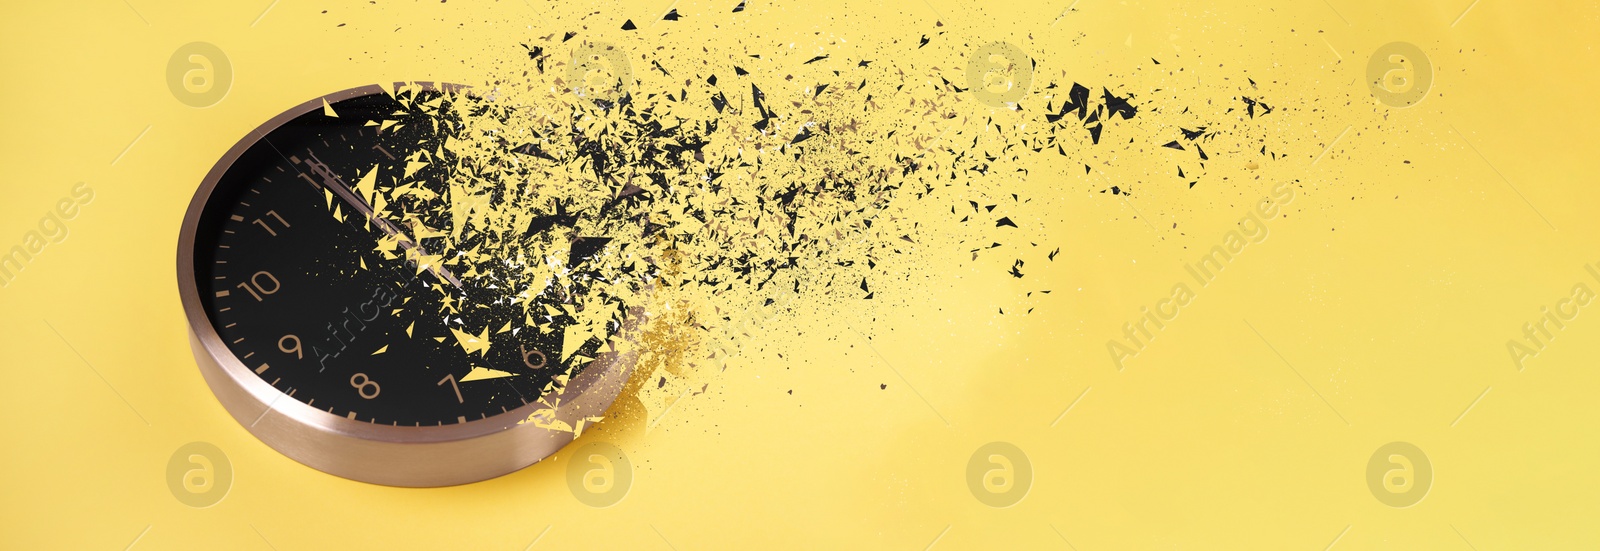 Image of Flow of time. Analog clock dissolving on yellow background, space for text. Banner design